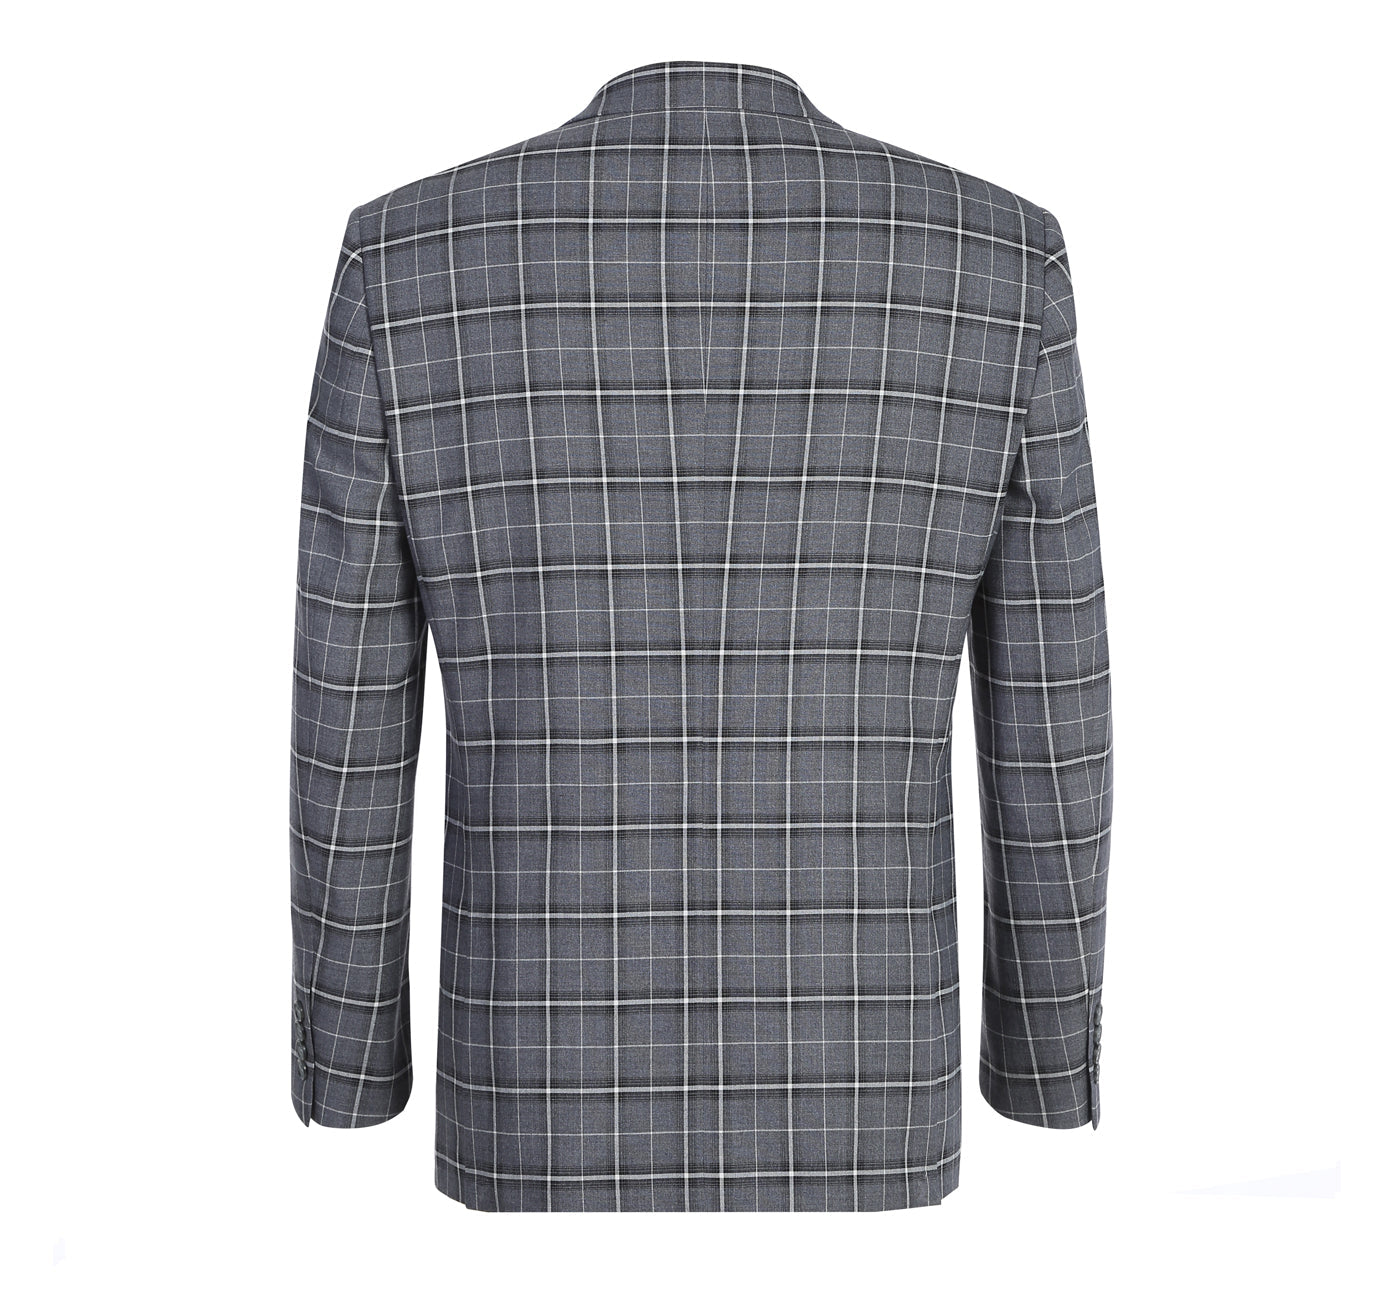 293-14 Men's Classic Fit Single-Breasted Grey & White Check Suit